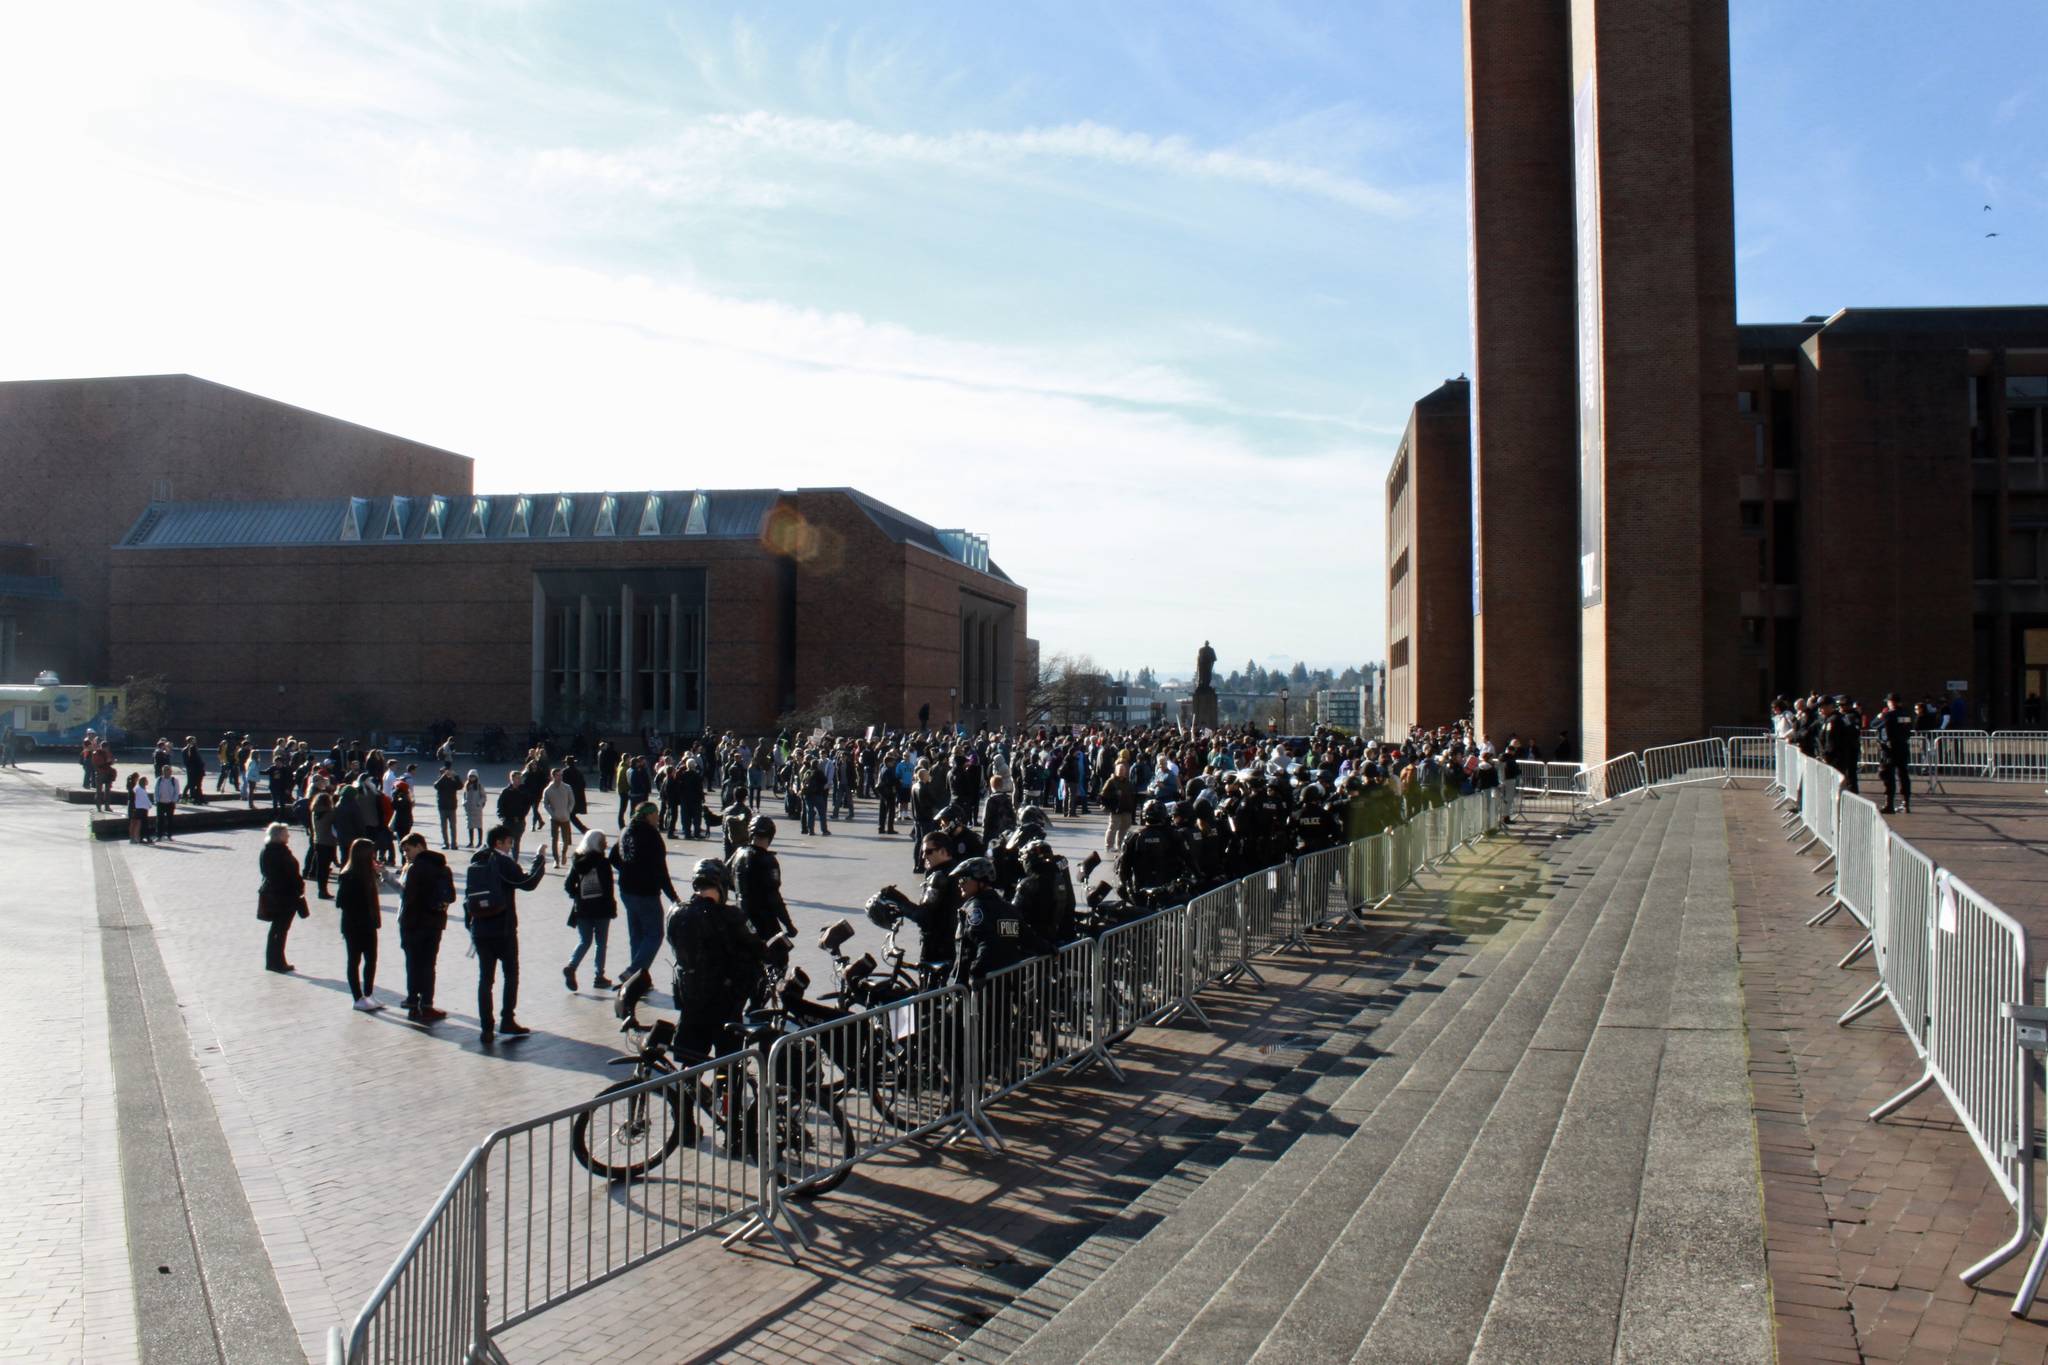 Police sectioned off UW’s Red Square with barricades. On the left,protesters and general public. On the right, behind the brick stacks, UWCR, Patriot Prayer, and their attendees. Photo by Kelsey Hamlin